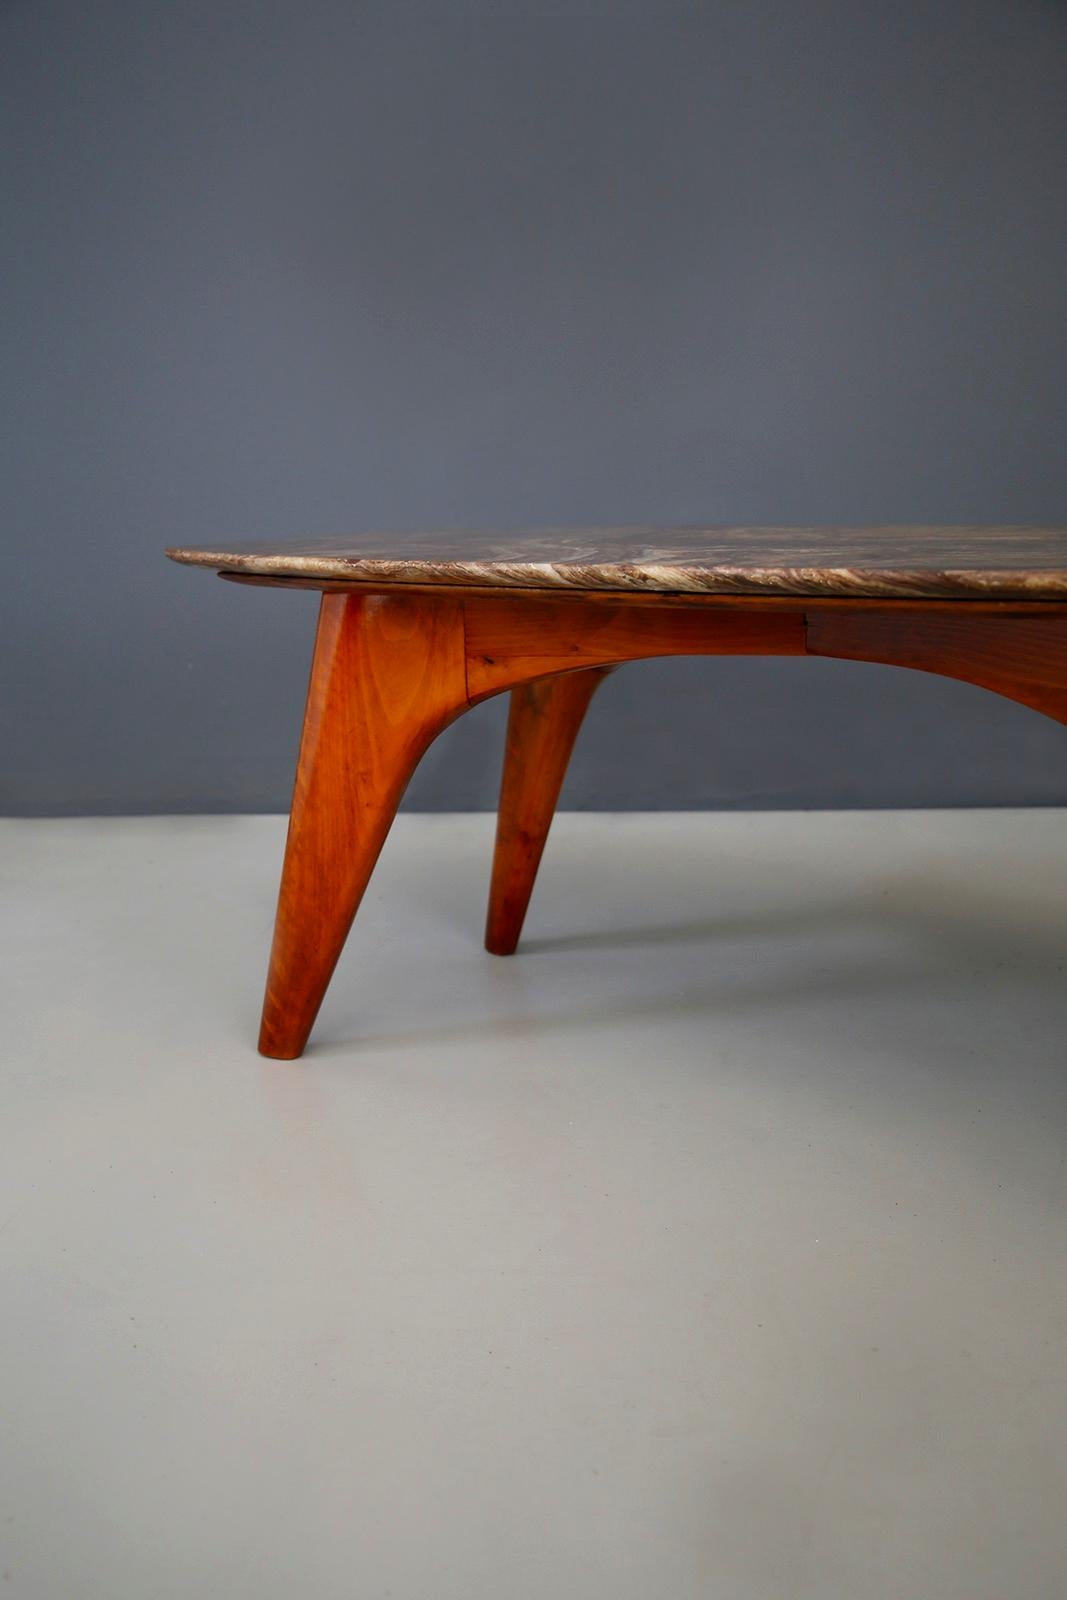 Rare table by Paolo Buffa in lunar marble, in perfect condition. This rare model of table created by the designer Paolo Buffa is made with a marble top and cherrywood structure.
The marble top has a rectangular shape, slightly flared at the